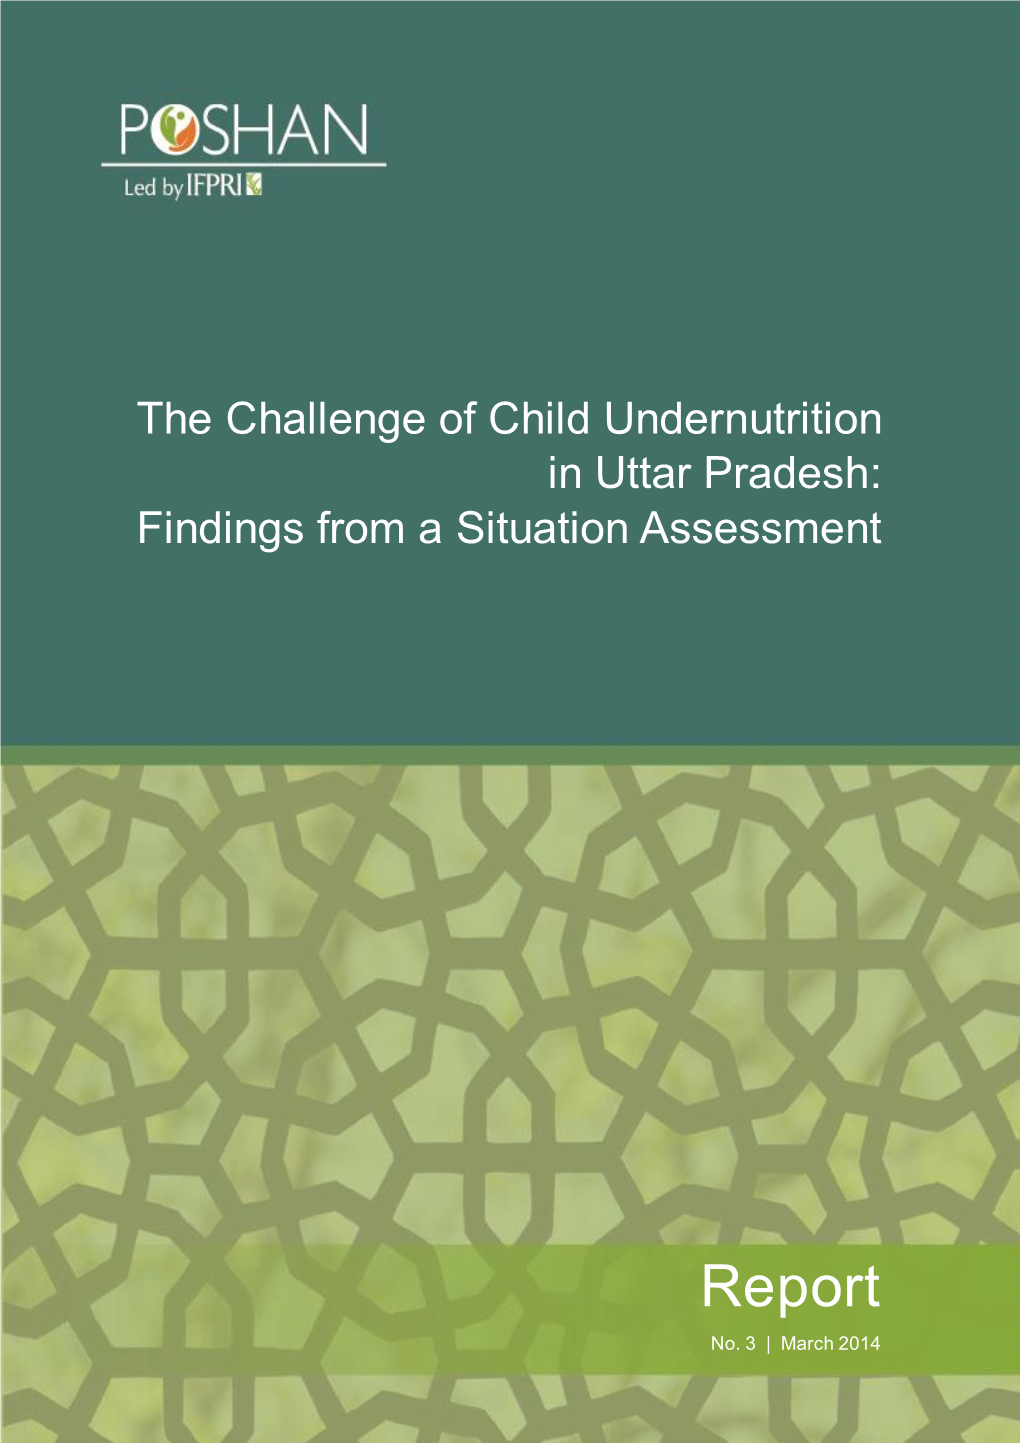 The Challenge of Child Undernutrition in Uttar Pradesh: Findings from a Situation Assessment